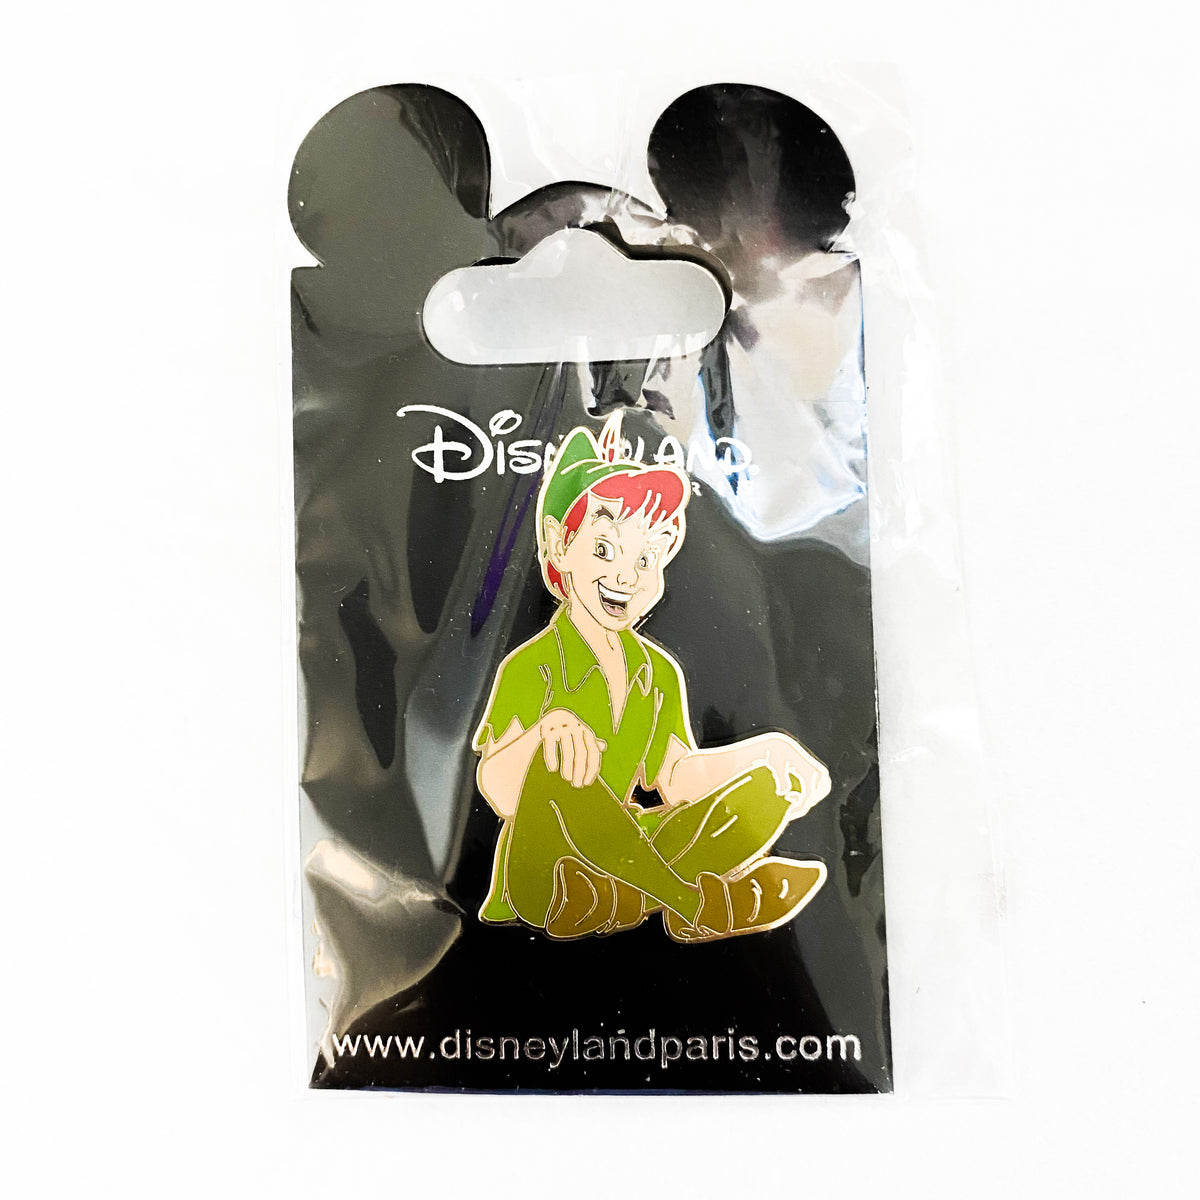 Tangled, Sleeping Beauty, Peter Pan, Mickey & Minnie in Hollywood